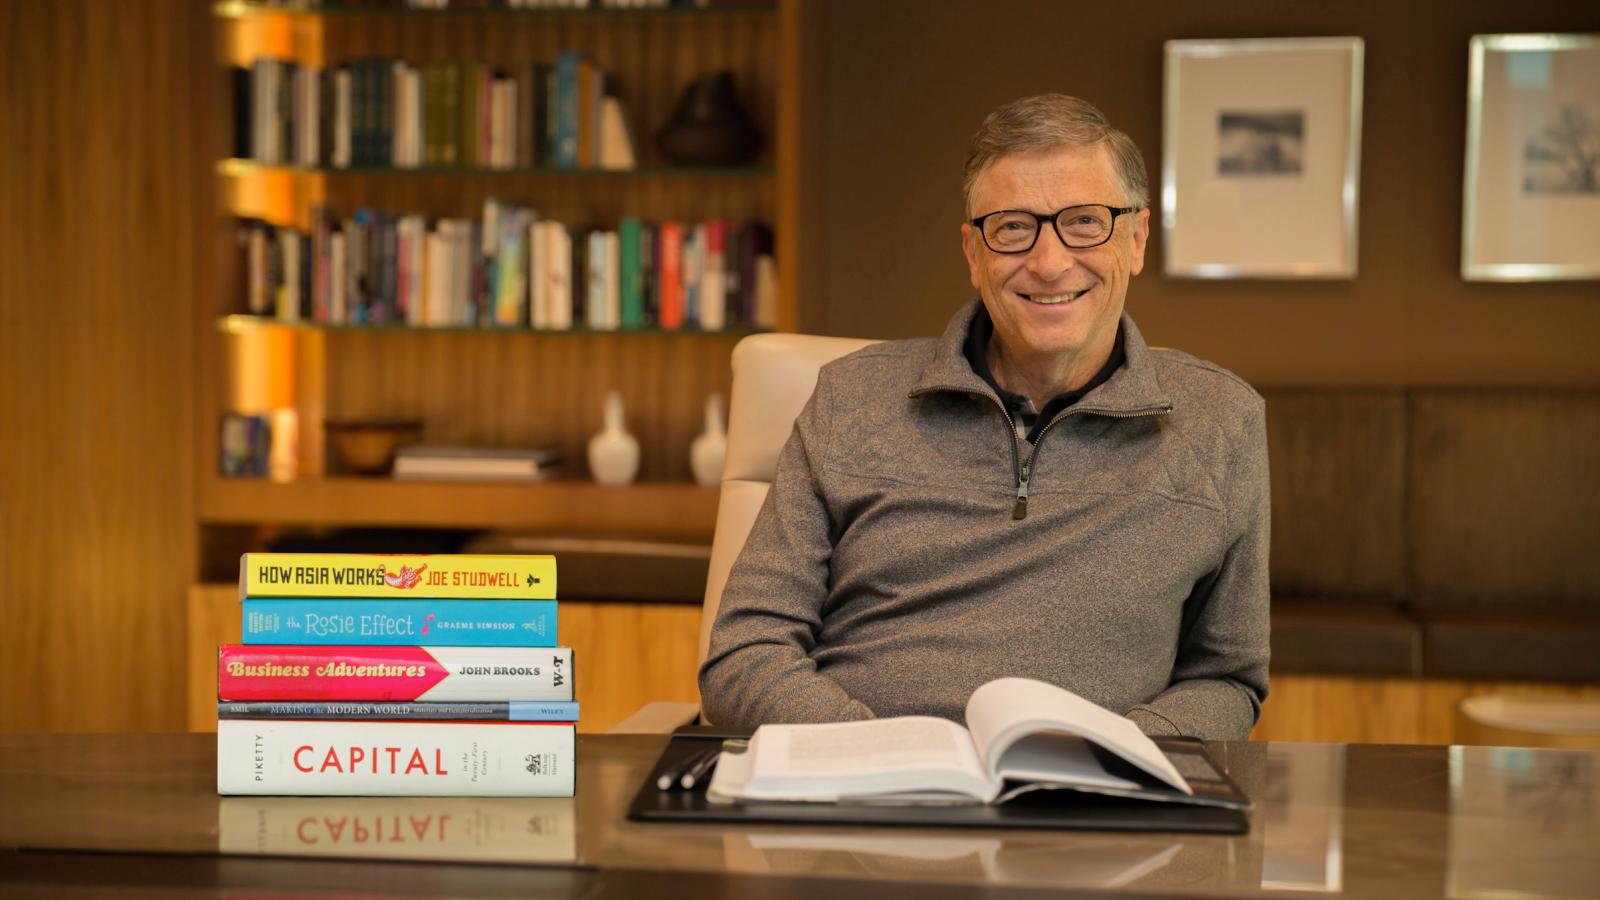 Bill Gates Book What Books Does He Read? Ninth Books